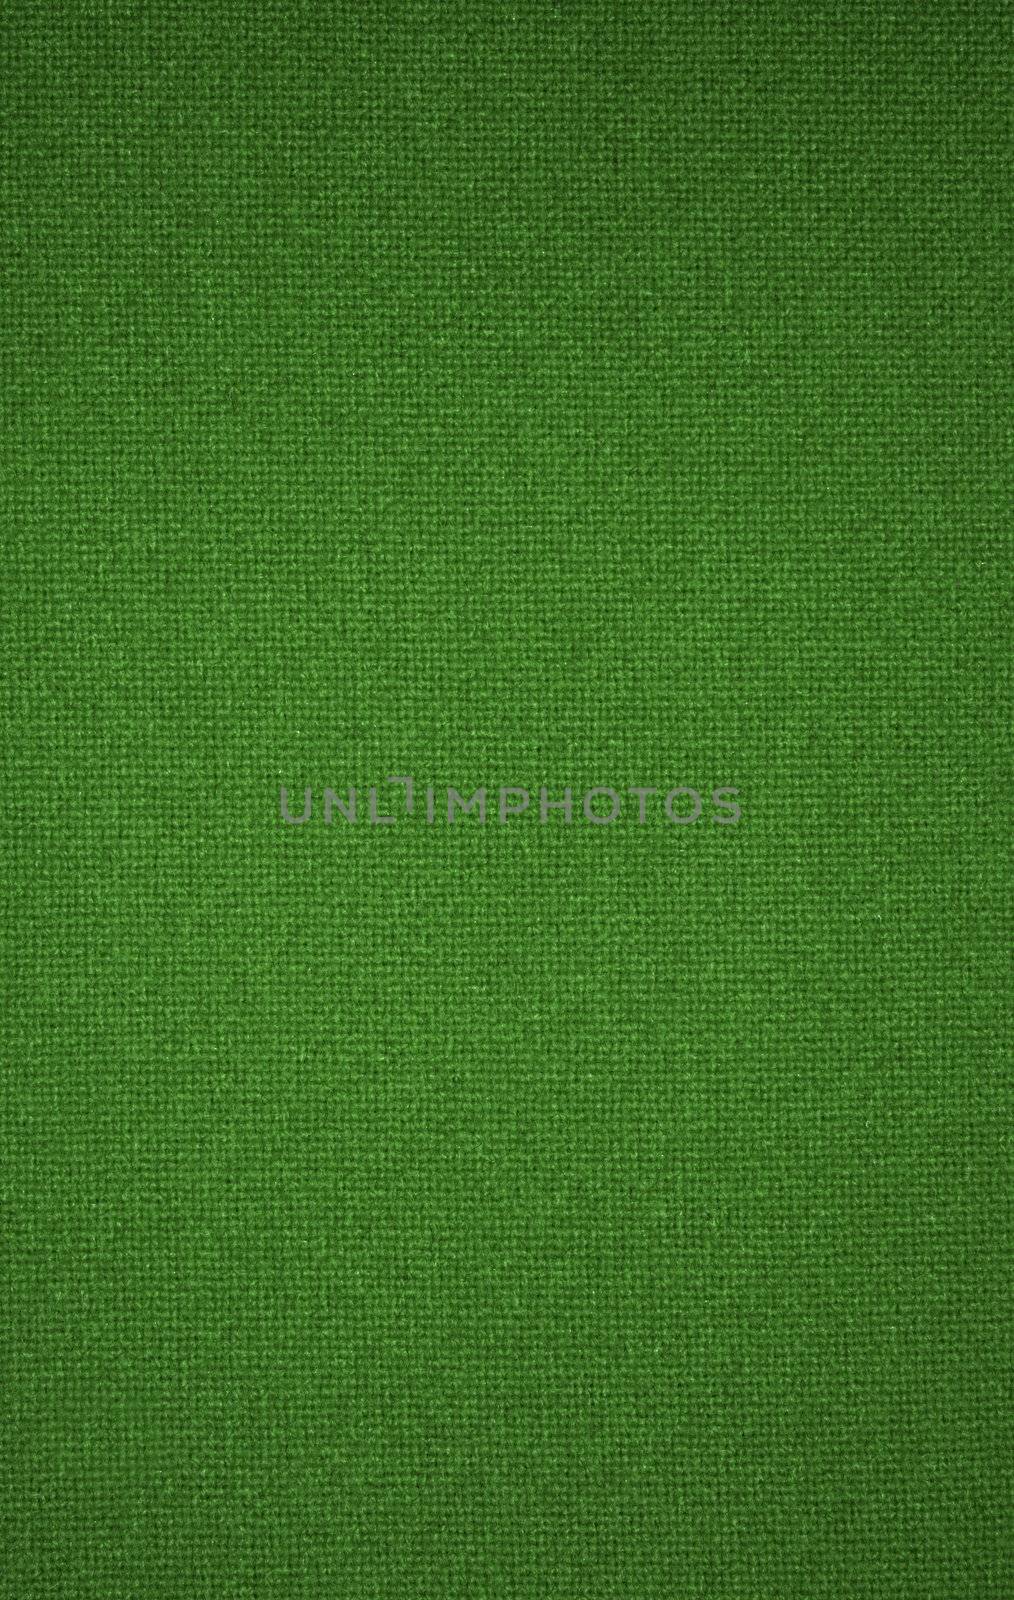 Background image of a green fabric texture